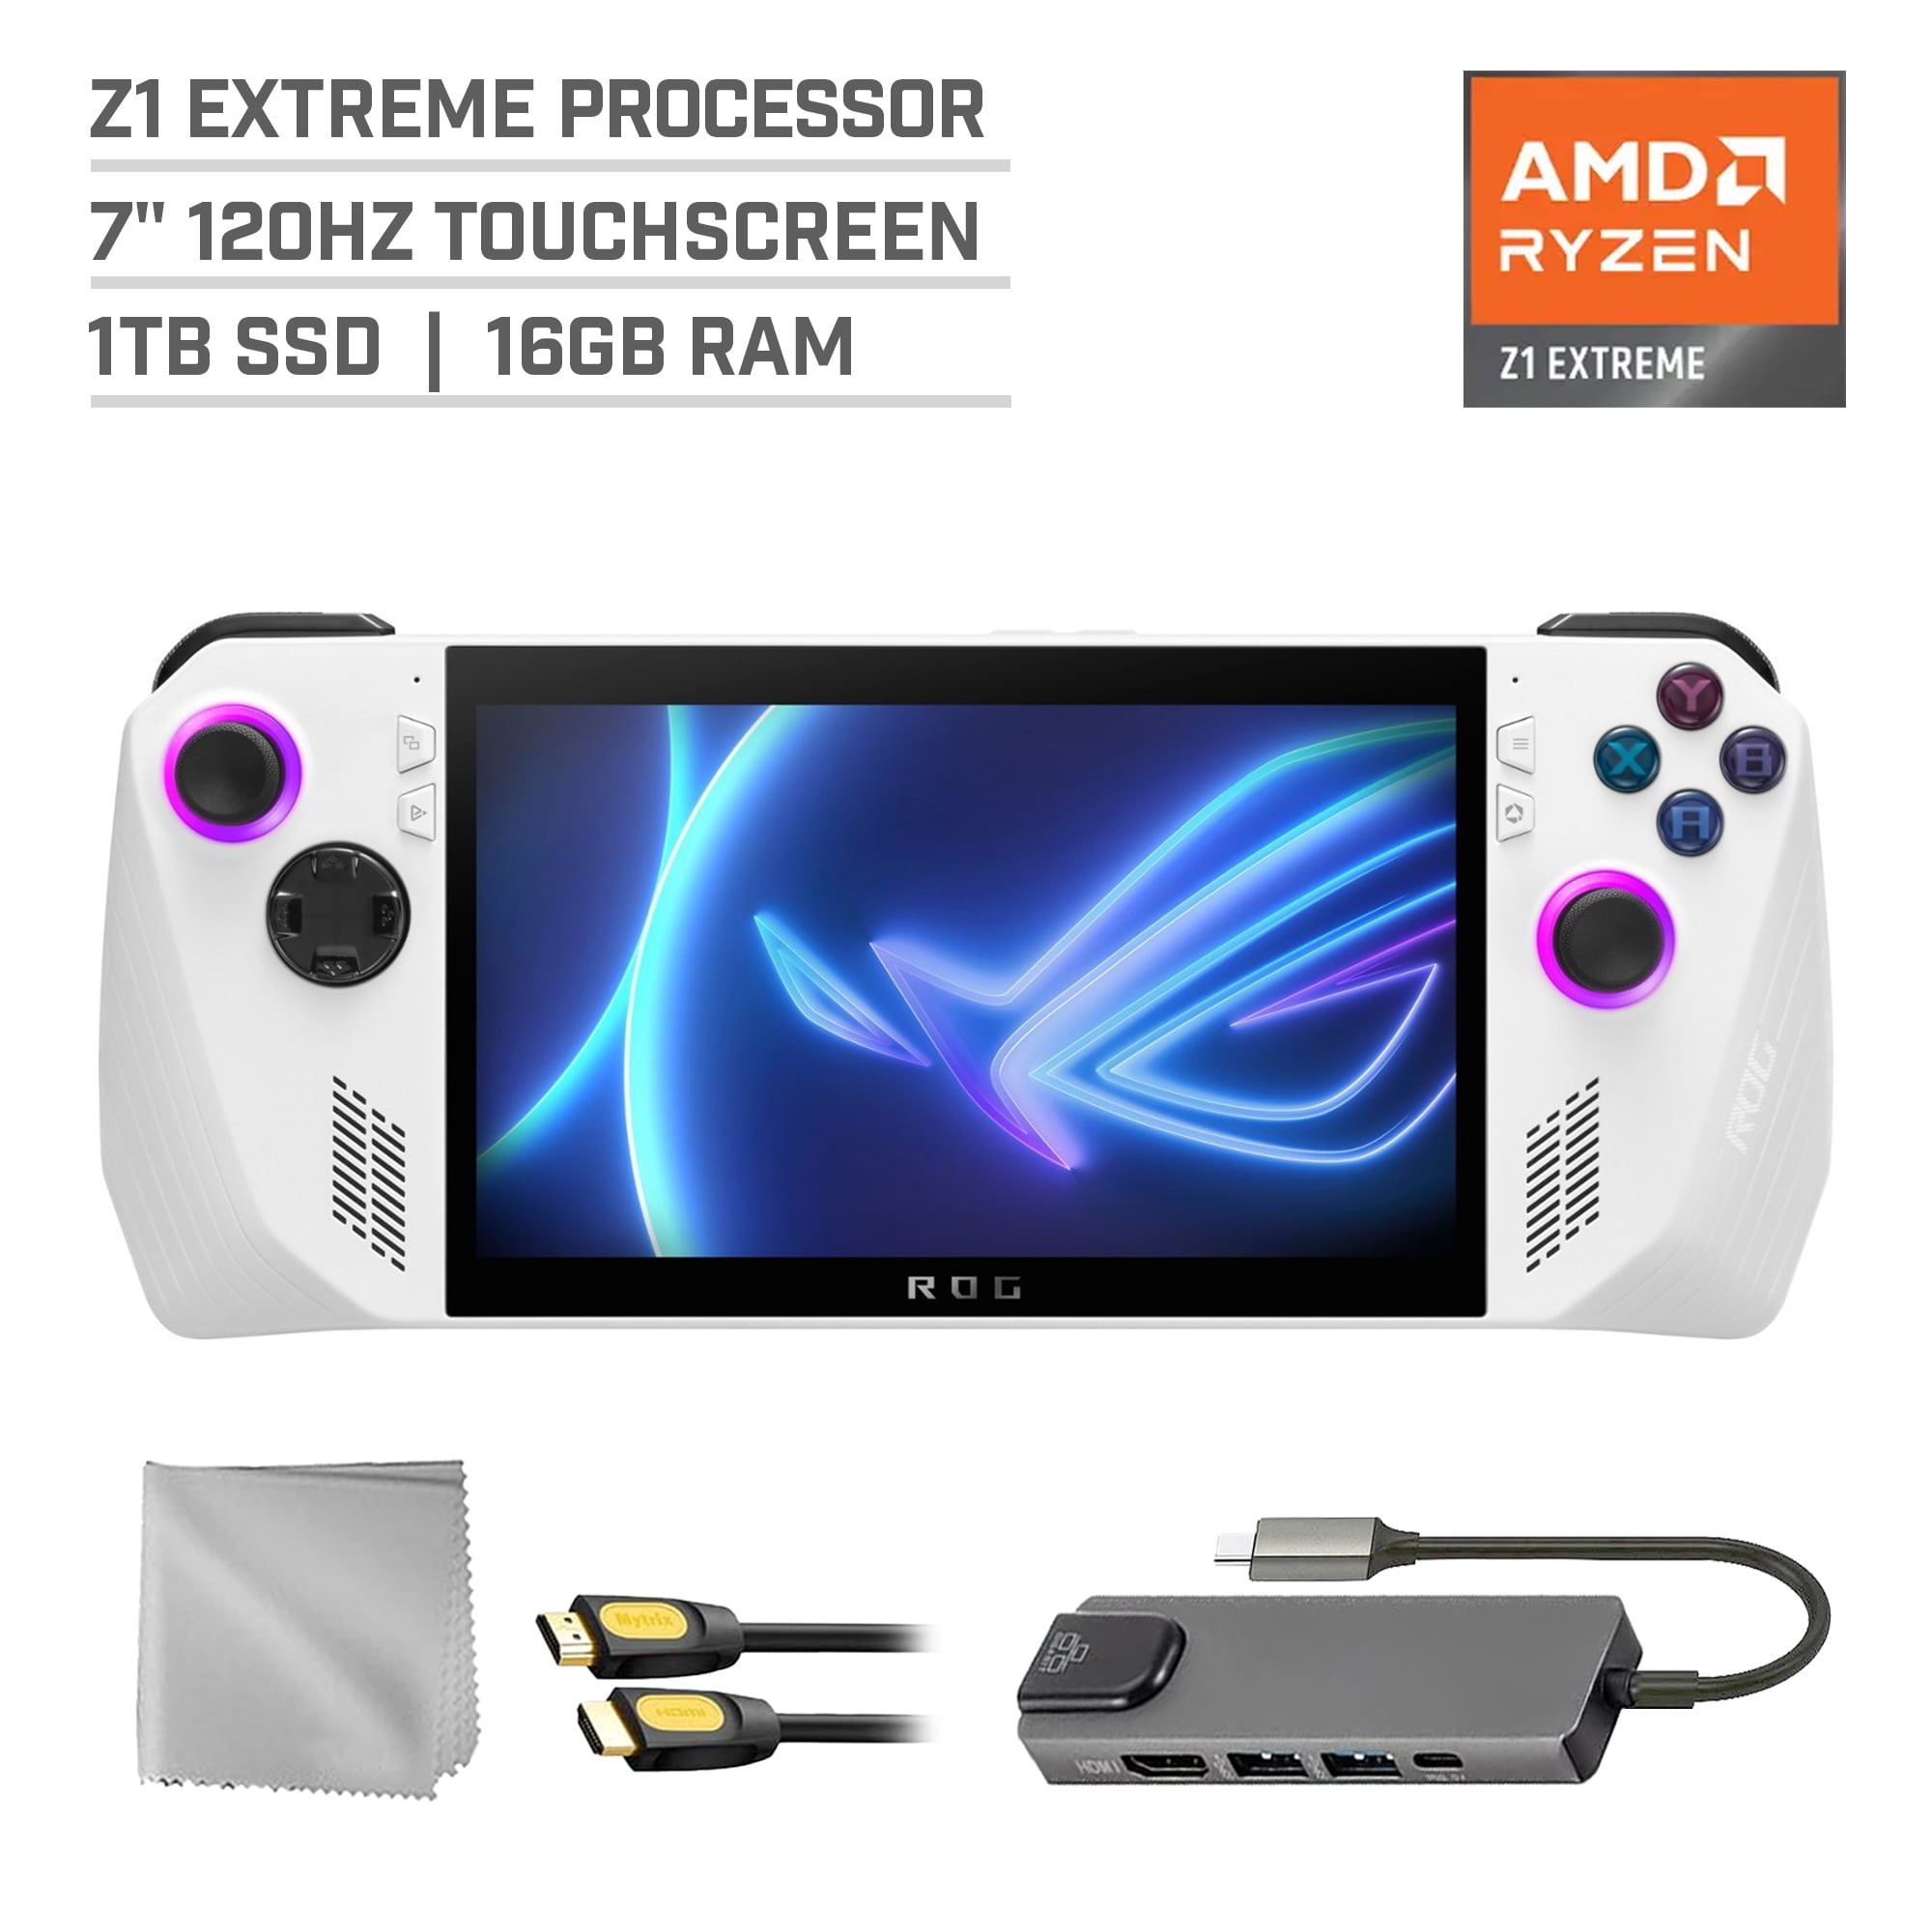 ASUS ROG Ally 1TB SSD Gaming Handheld 7-inch Touchscreen 120Hz FHD 1080p  AMD Ryzen Z1 Extreme Processor, Mytrix Hub, HDMI Cable, 3 Accessories: 4 in  1 Bundle 